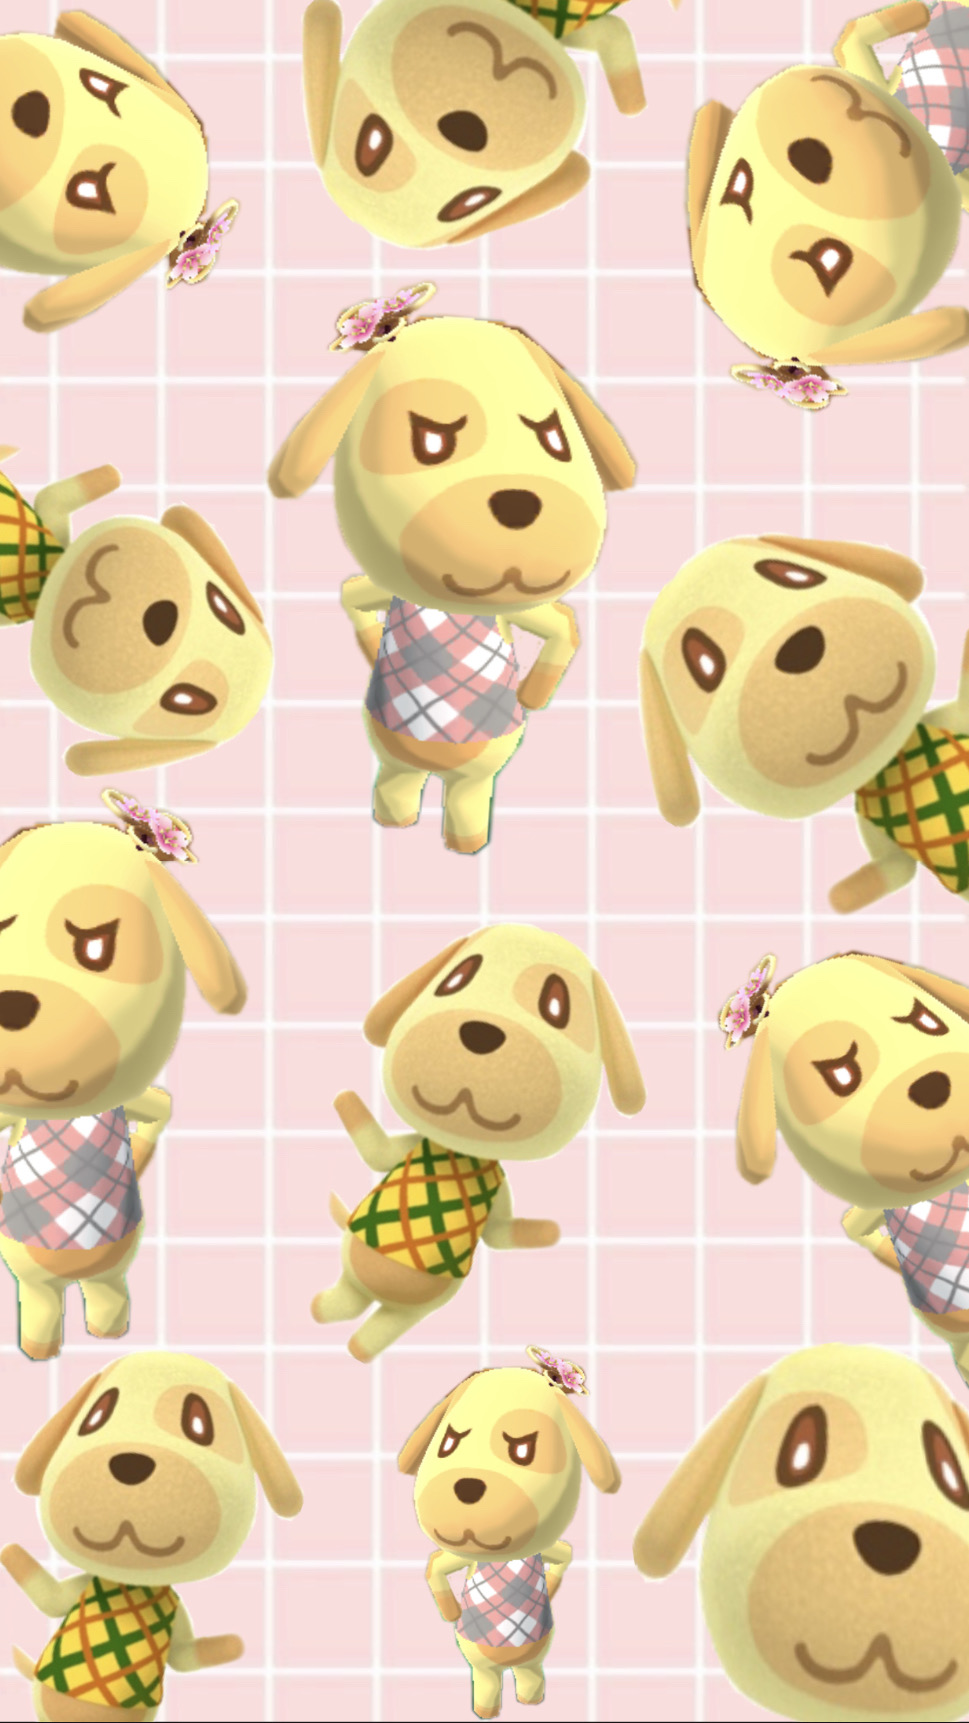 animalcrossing goldie Image by